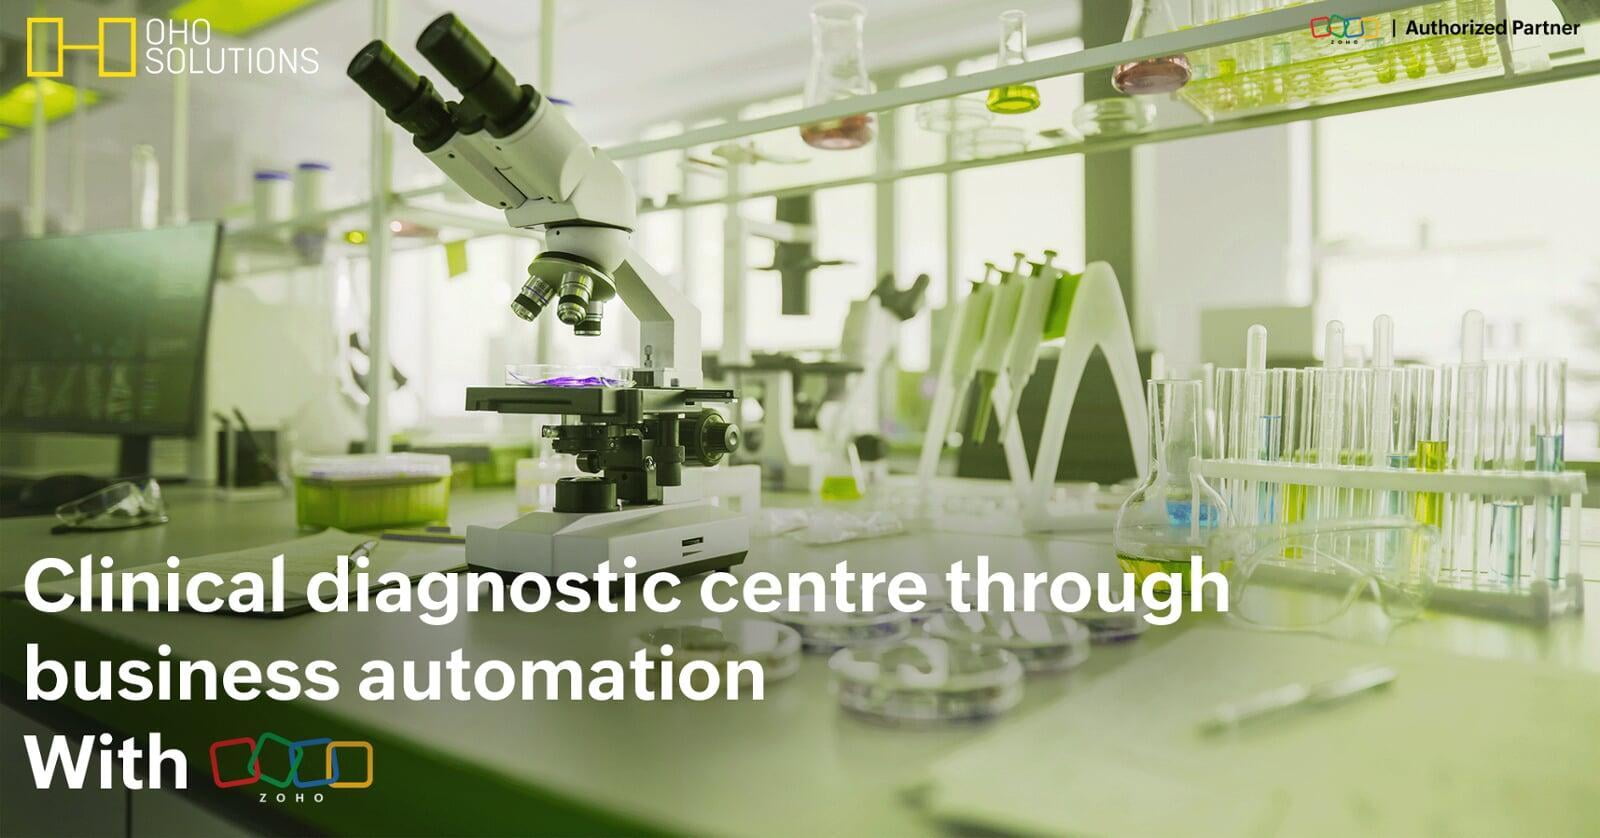 How to resolve the managerial problems in a clinical diagnostic centre through business automation?